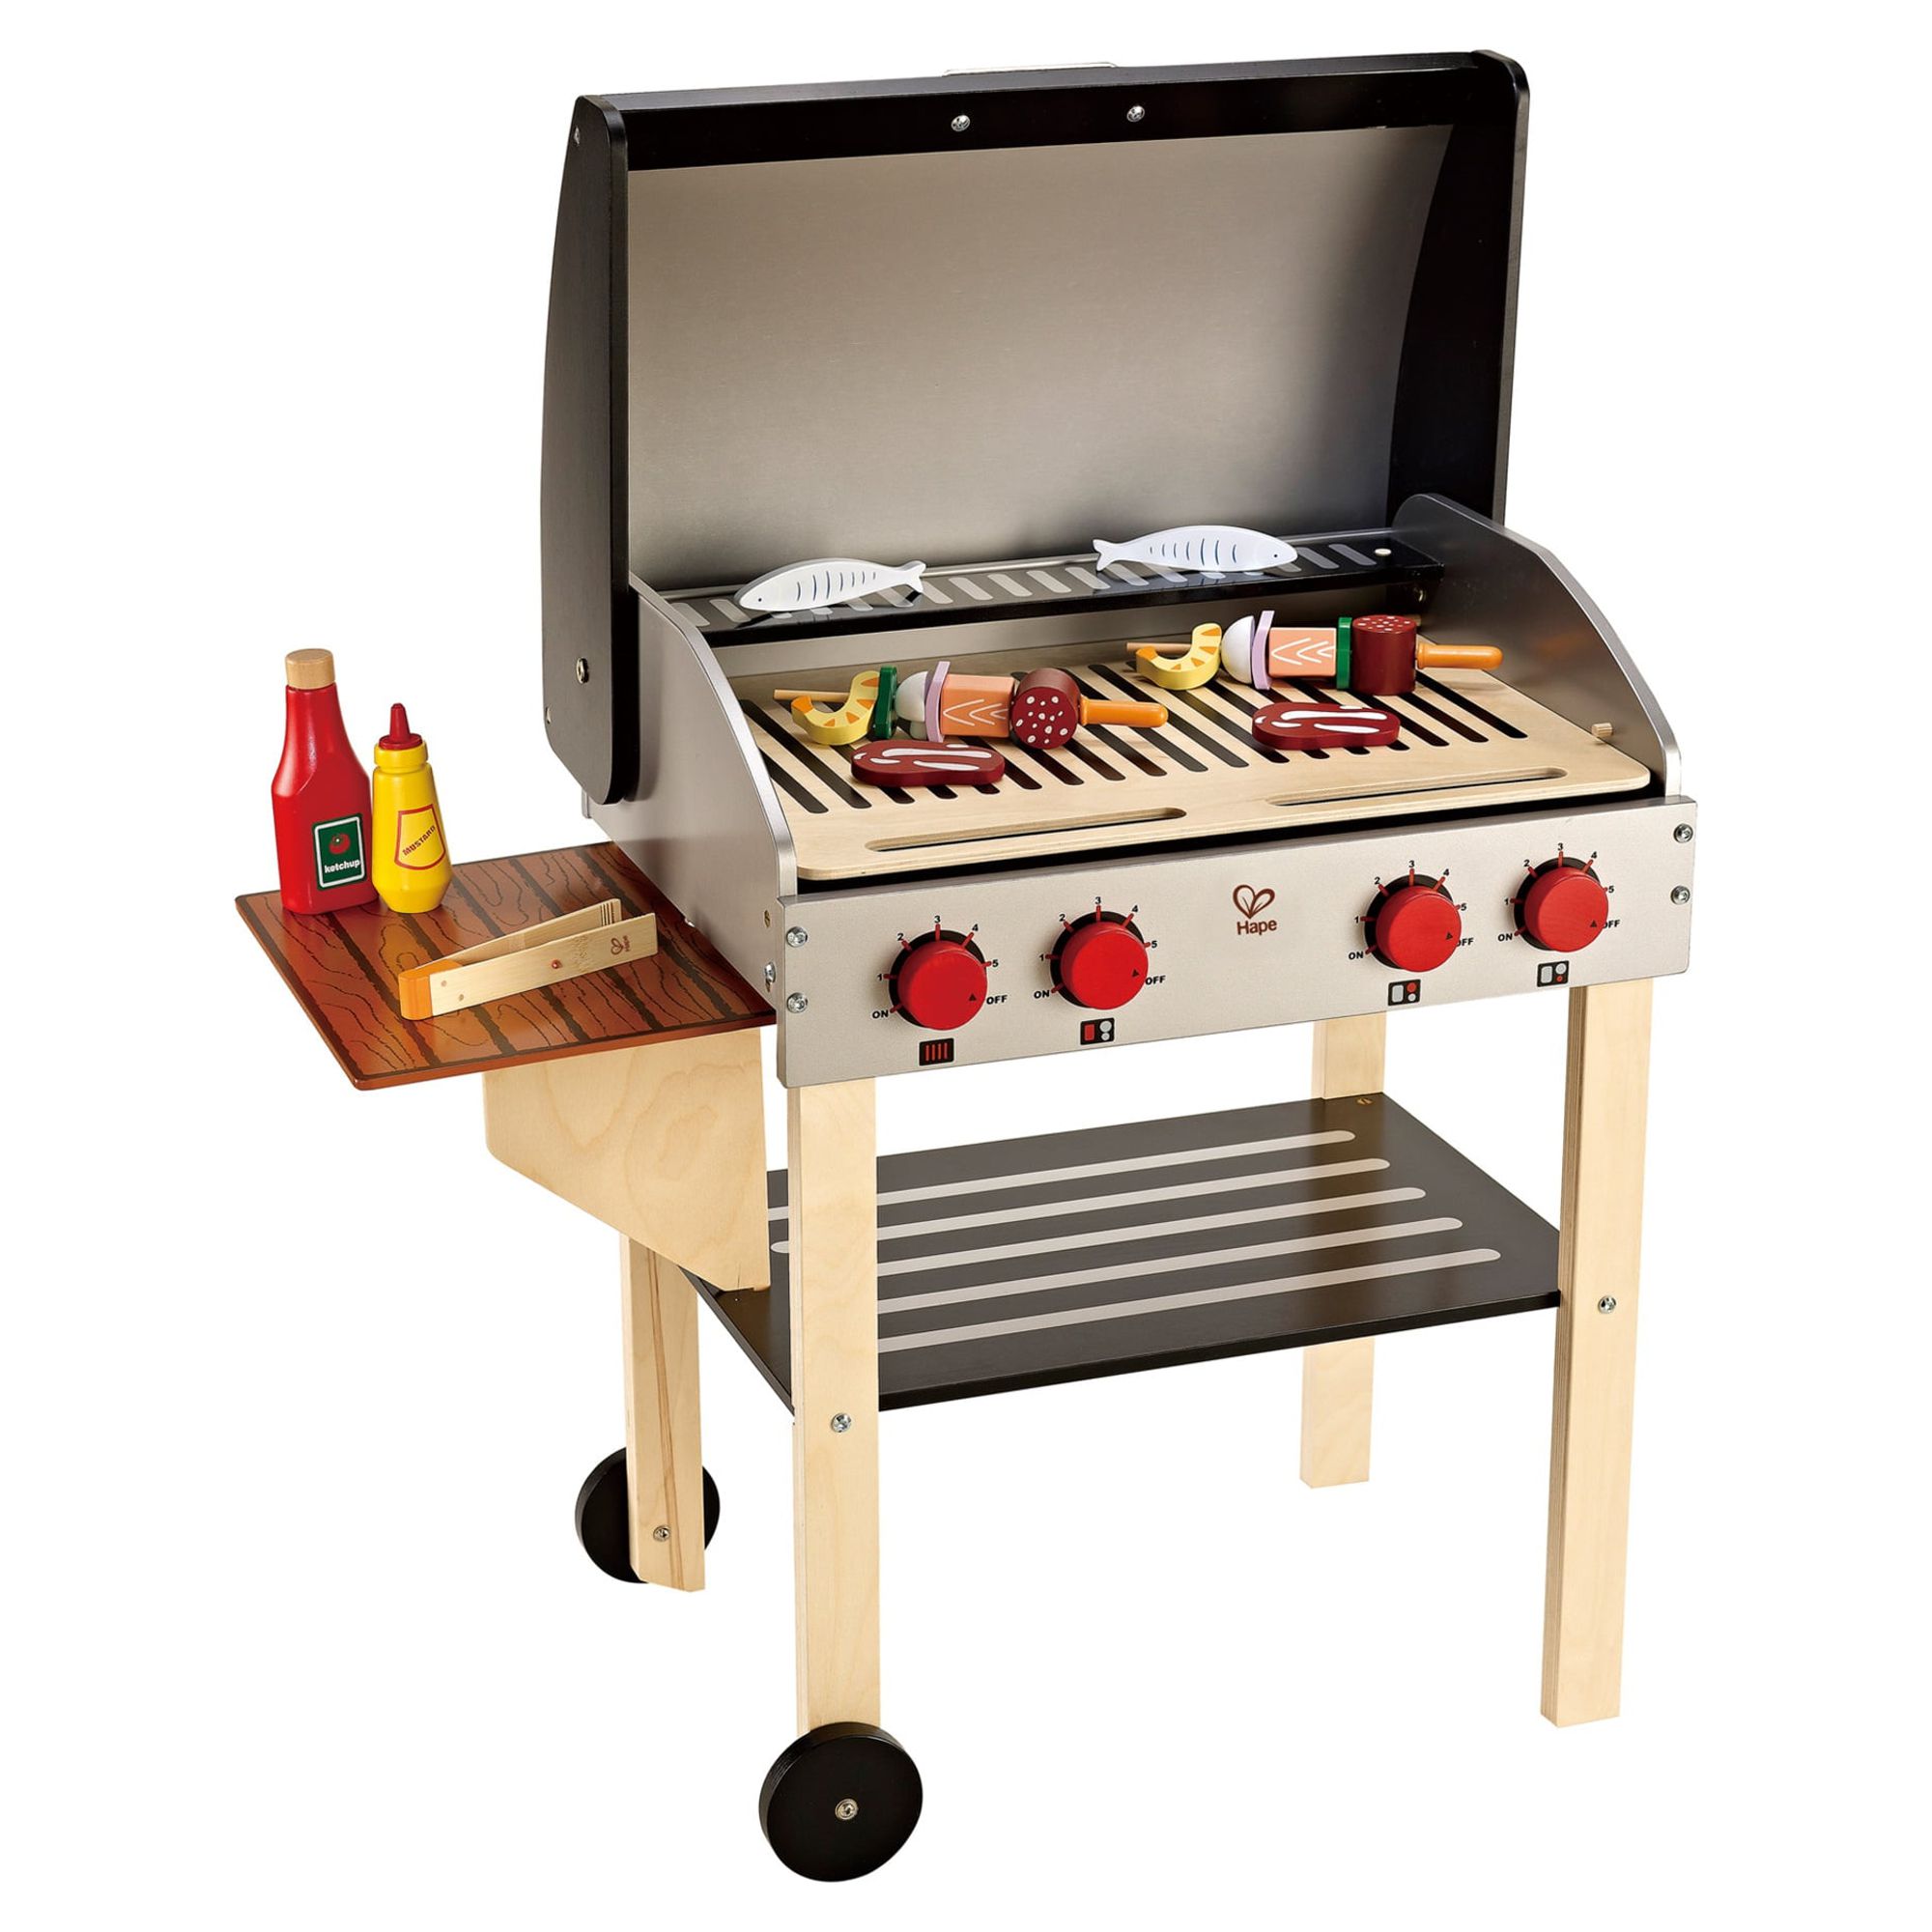 Hape Gourmet Grill Wooden Play Kitchen & Food Accessories, 22 Pieces - image 1 of 7